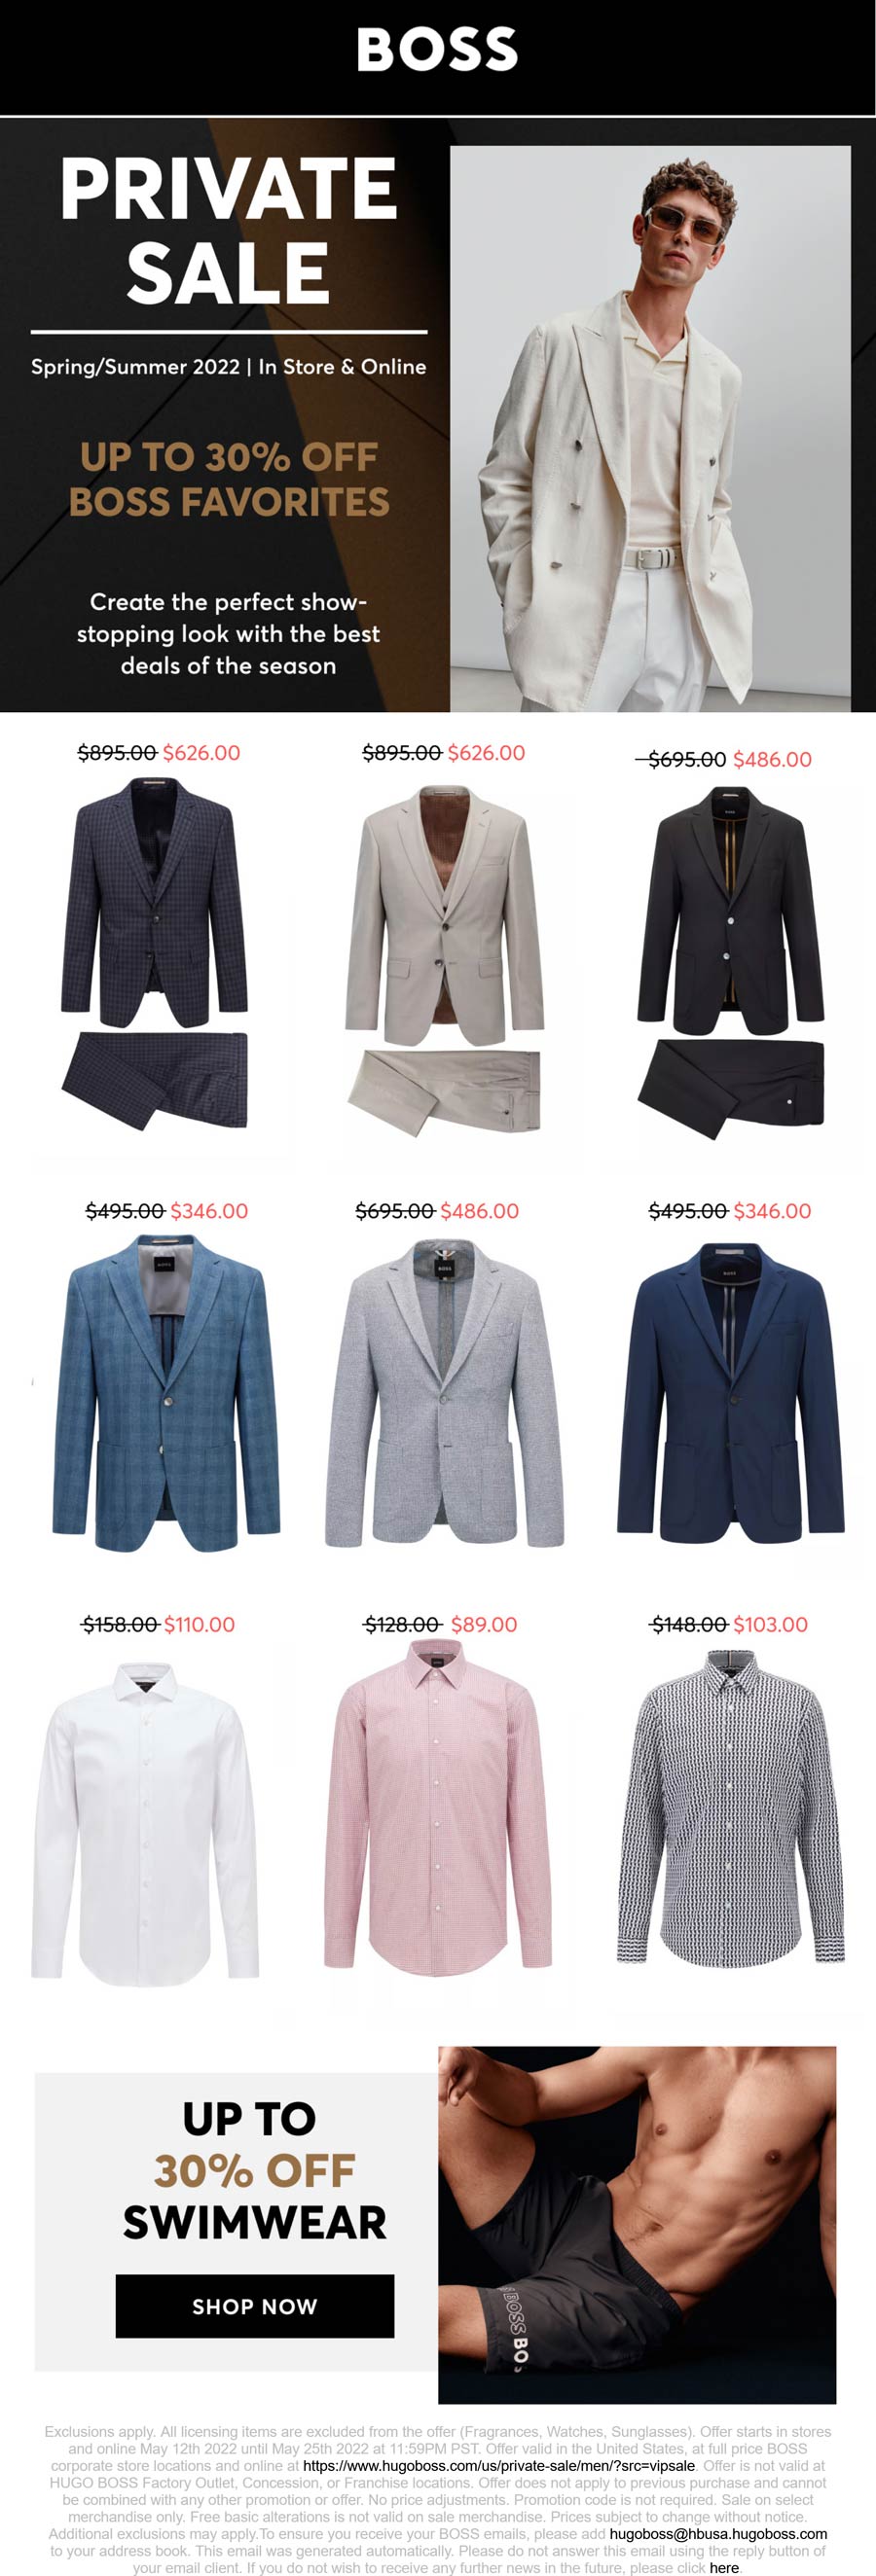 BOSS stores Coupon  30% off various suits & swimwear at BOSS, ditto online #boss 